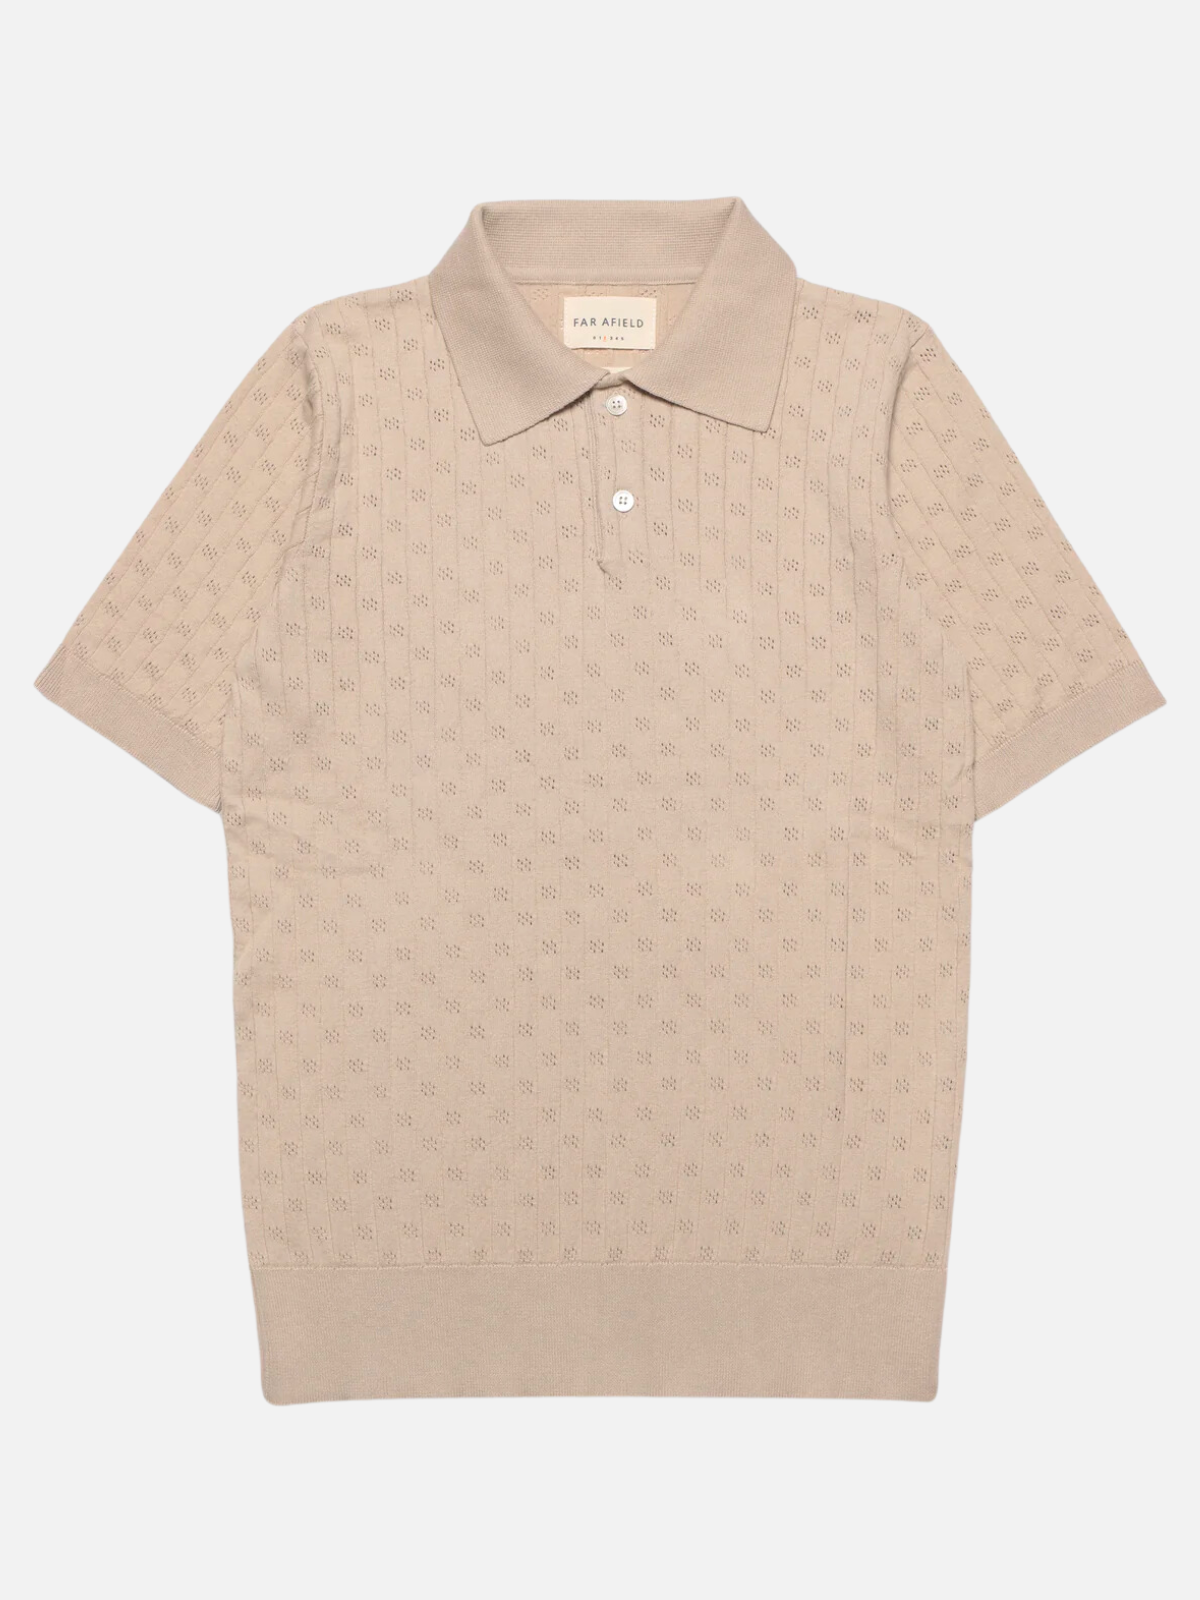 far afield jacobs ss short sleeve perforated lace polo sand peyote cream tan color 100% organic cotton knit sweater polo ribbed cuff hem kempt athens ga georgia men's clothing store